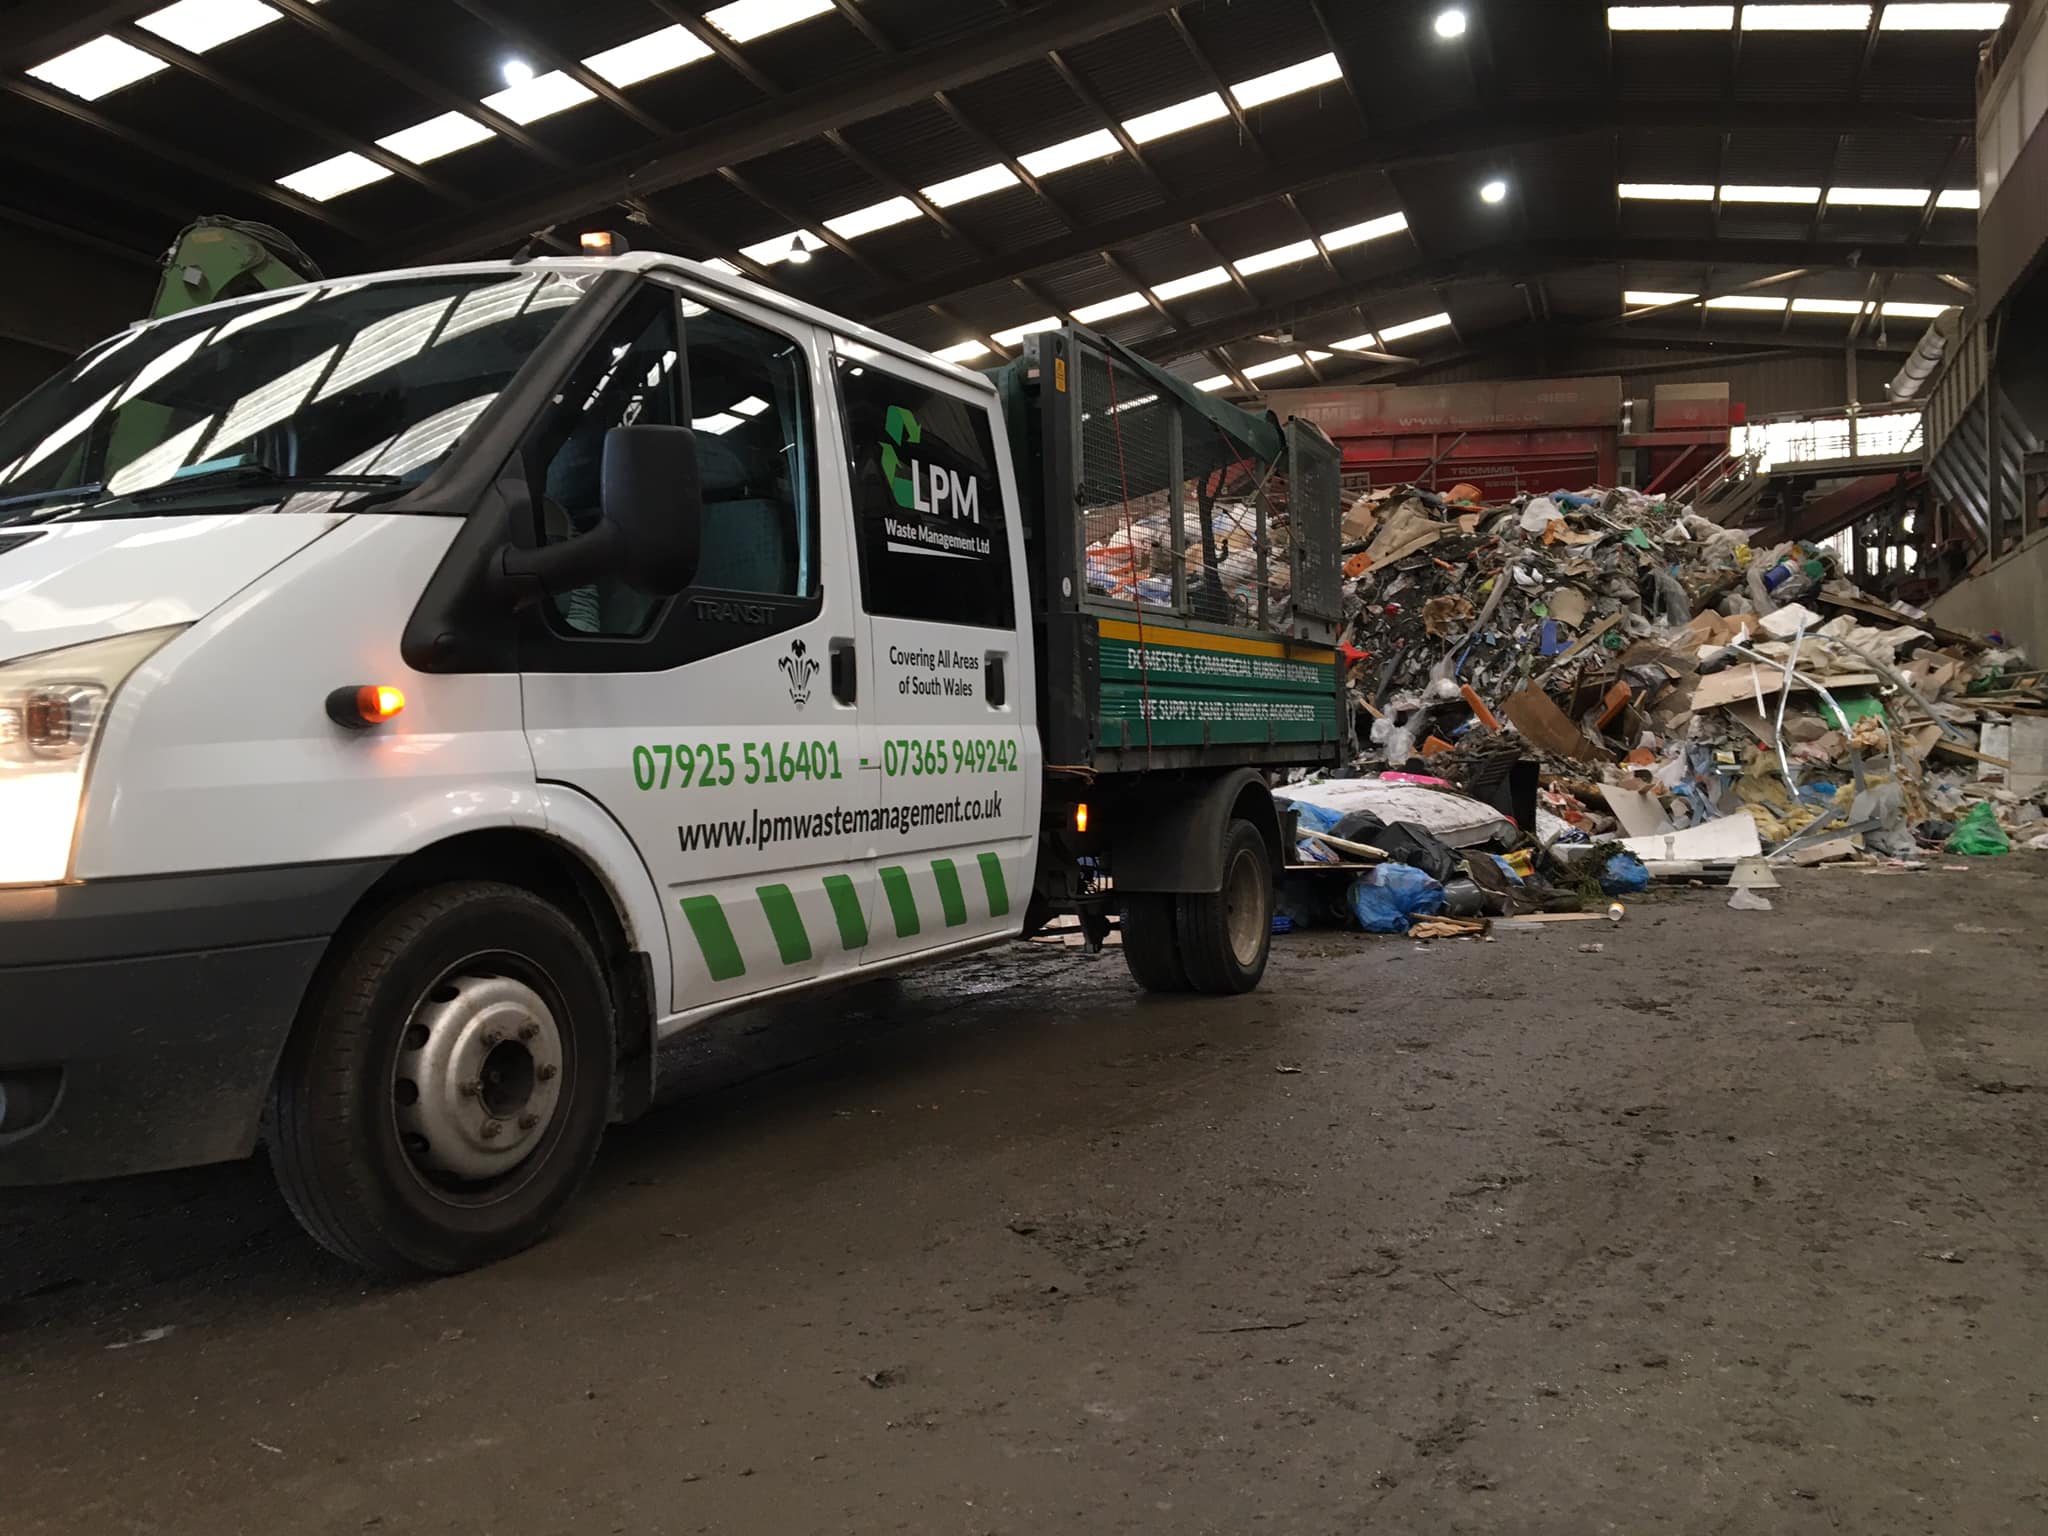 A photo of a waste truck in a commercial recycling plant